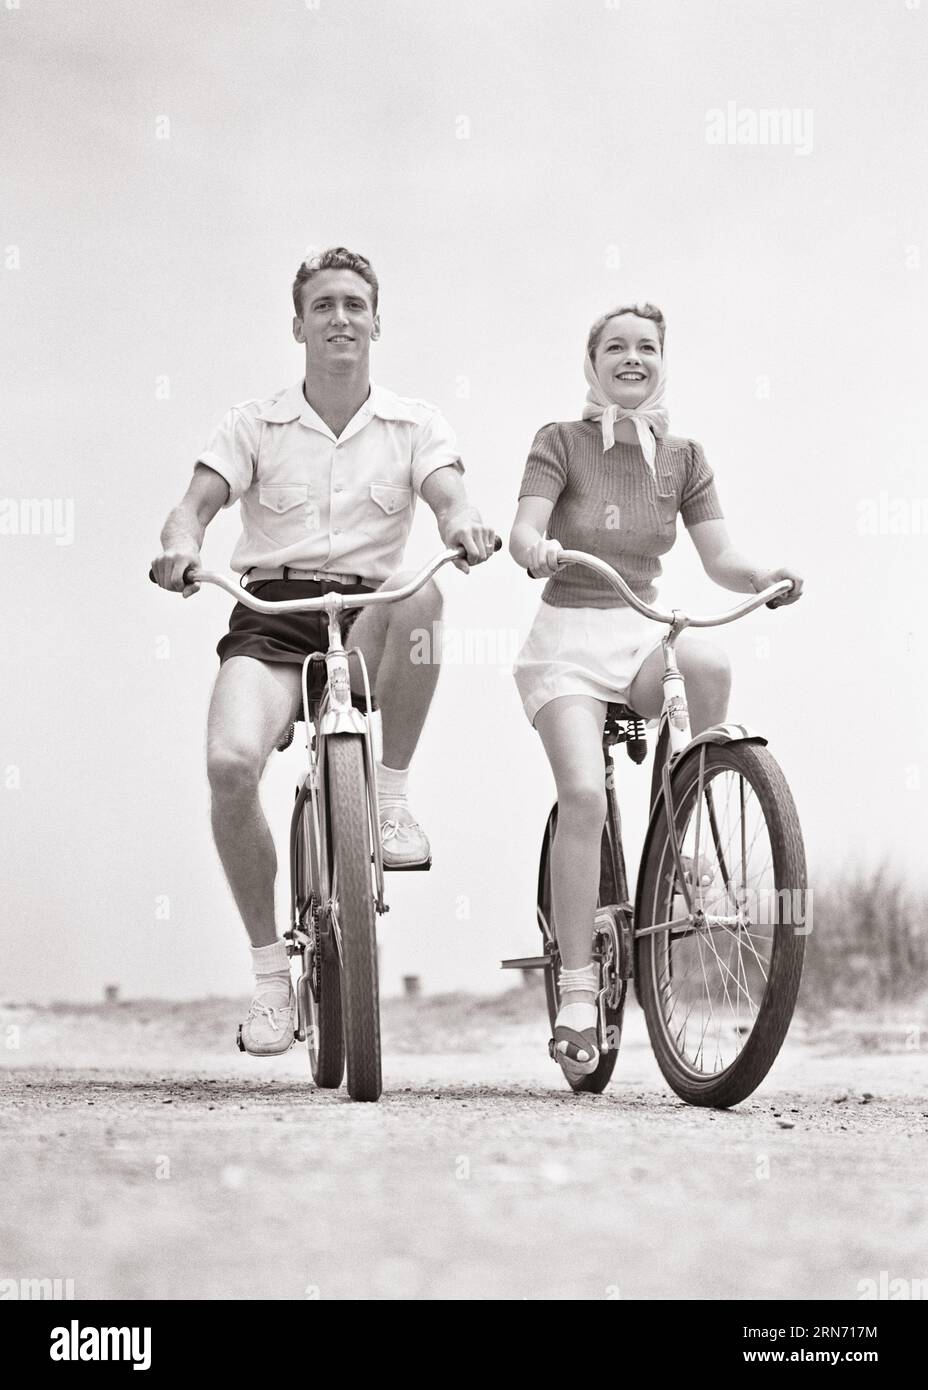 1940s SMILING YOUNG COUPLE MAN AND WOMAN WEARING SHORTS RIDING BEACH BIKES LOOKING AT CAMERA  - b17839 HAR001 HARS 1 FITNESS SHORTS HEALTHY YOUNG ADULT BALANCE TEAMWORK VACATION PLEASED JOY LIFESTYLE FEMALES MARRIED BIKING RURAL SPOUSE HUSBANDS HEALTHINESS COPY SPACE FRIENDSHIP FULL-LENGTH LADIES PHYSICAL FITNESS PERSONS INSPIRATION MALES SERENITY TOWARDS CONFIDENCE BICYCLES TRANSPORTATION B&W PARTNER BIKES EYE CONTACT FREEDOM GOALS TIME OFF ACTIVITY HAPPINESS PHYSICAL WELLNESS CHEERFUL ADVENTURE LEISURE STRENGTH TRIP AND GETAWAY EXCITEMENT LOW ANGLE RECREATION DIRECTION PRIDE OPPORTUNITY Stock Photo